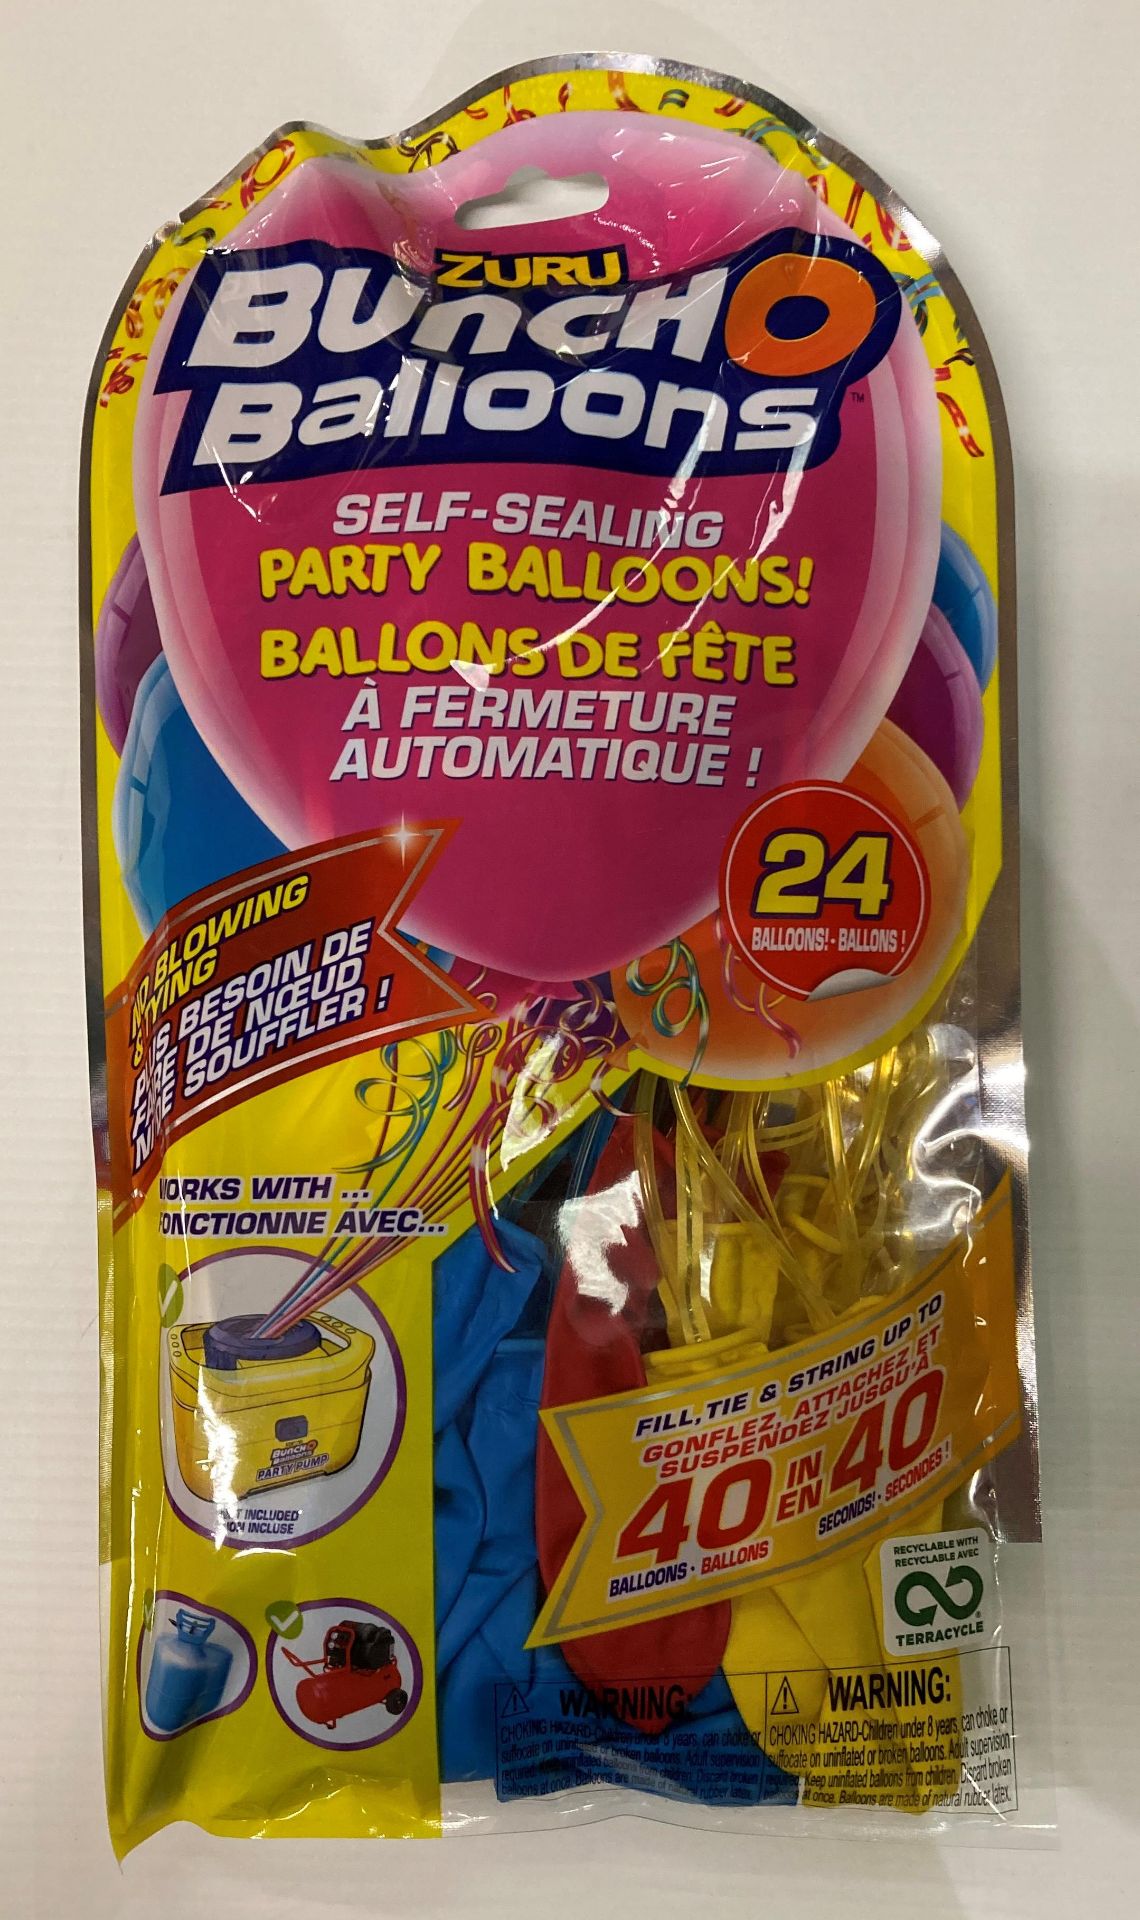 40 x packs of Zuru Bunch O Balloons - each pack contains 24 x self sealing balloons for use with